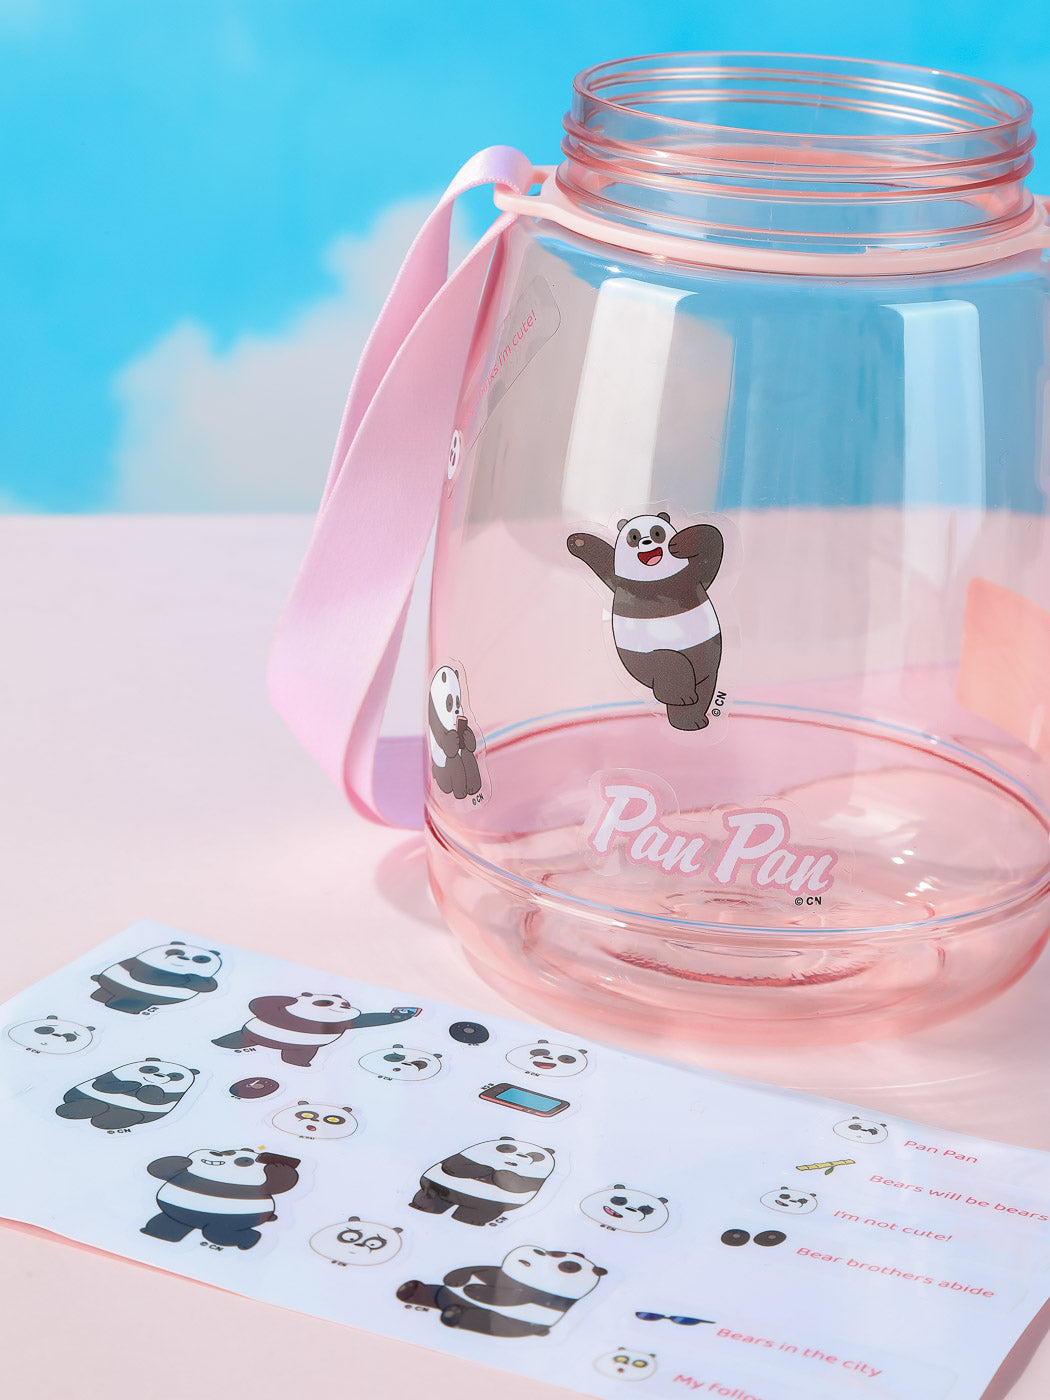 MINISO WE BARE BEARS COLLECTION 4.0 COOL WATER BOTTLE WITH SHOULDER STRAP - 1300ML (PANDA) 2012257111109 PLASTIC WATER BOTTLE